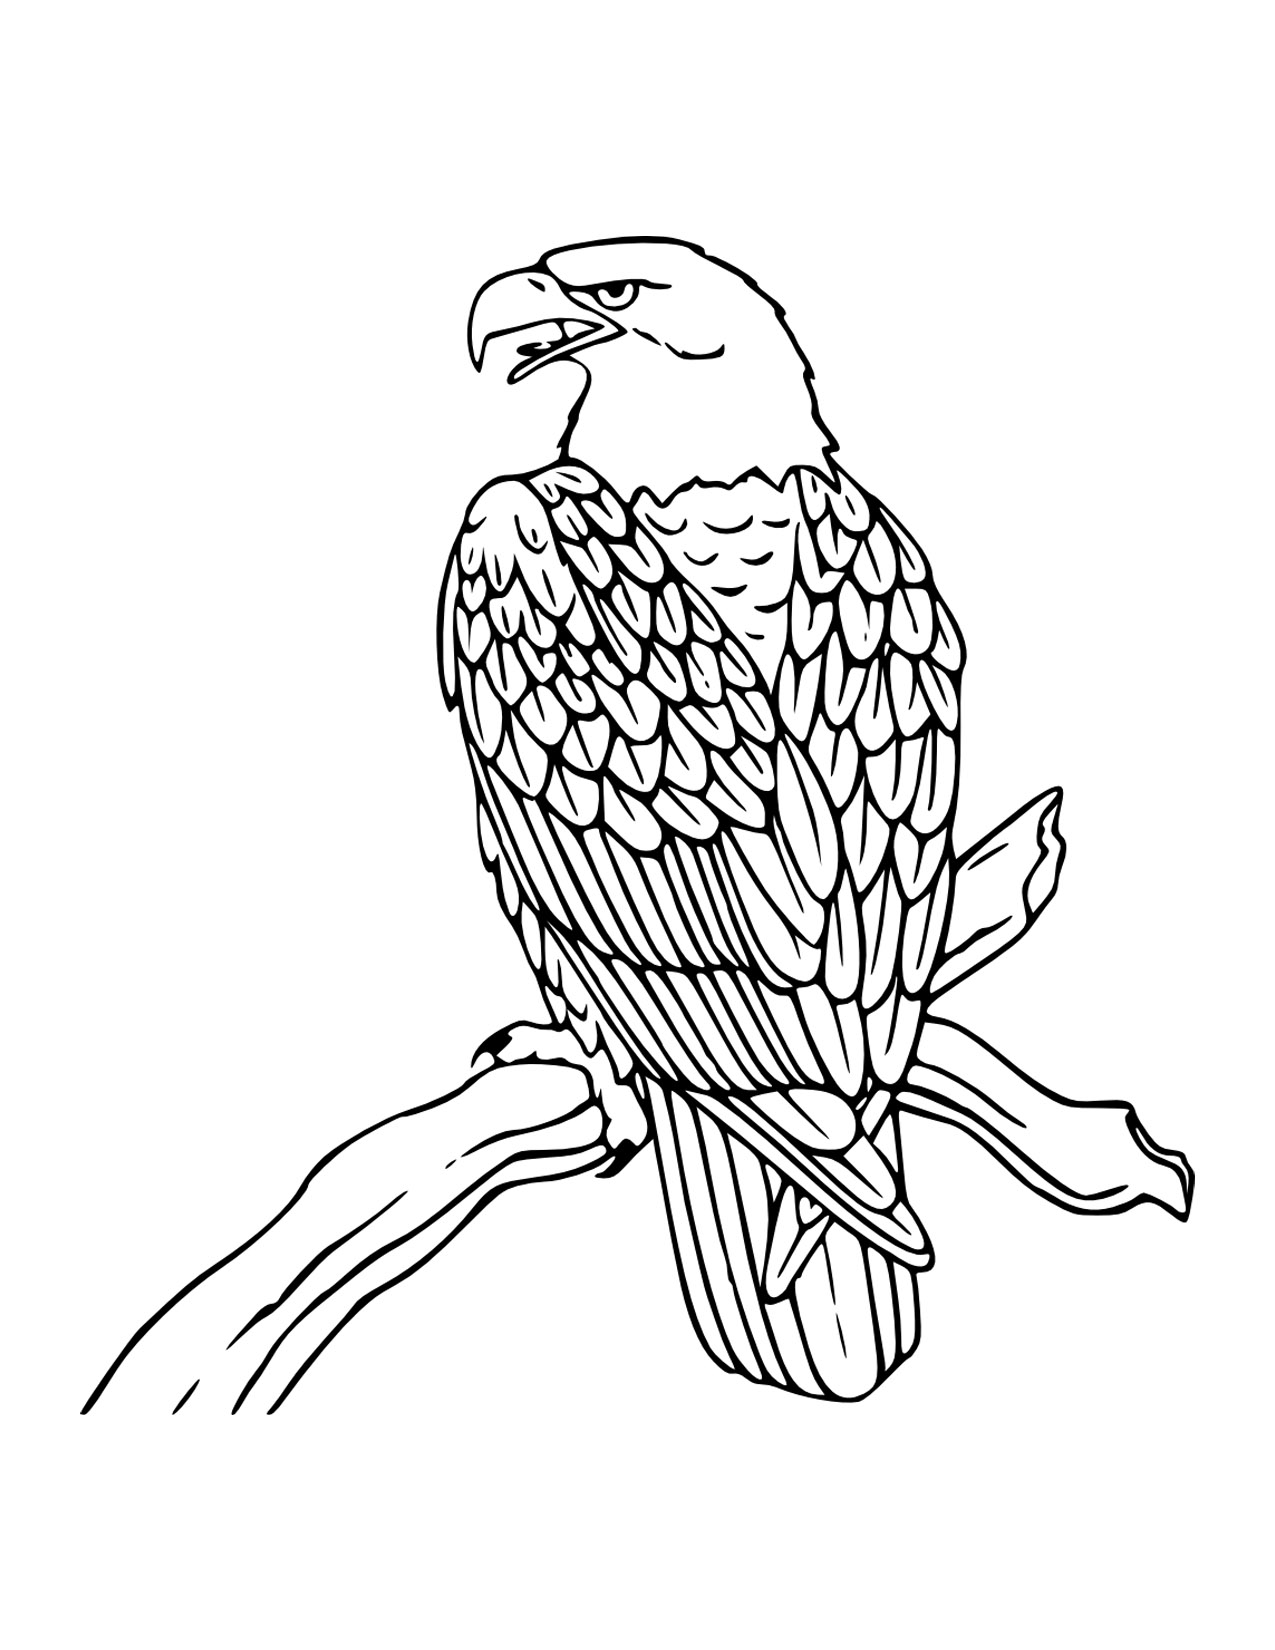 bald eagle coloring page rules of the jungle printable pictures of bald eagle eagle page coloring bald 